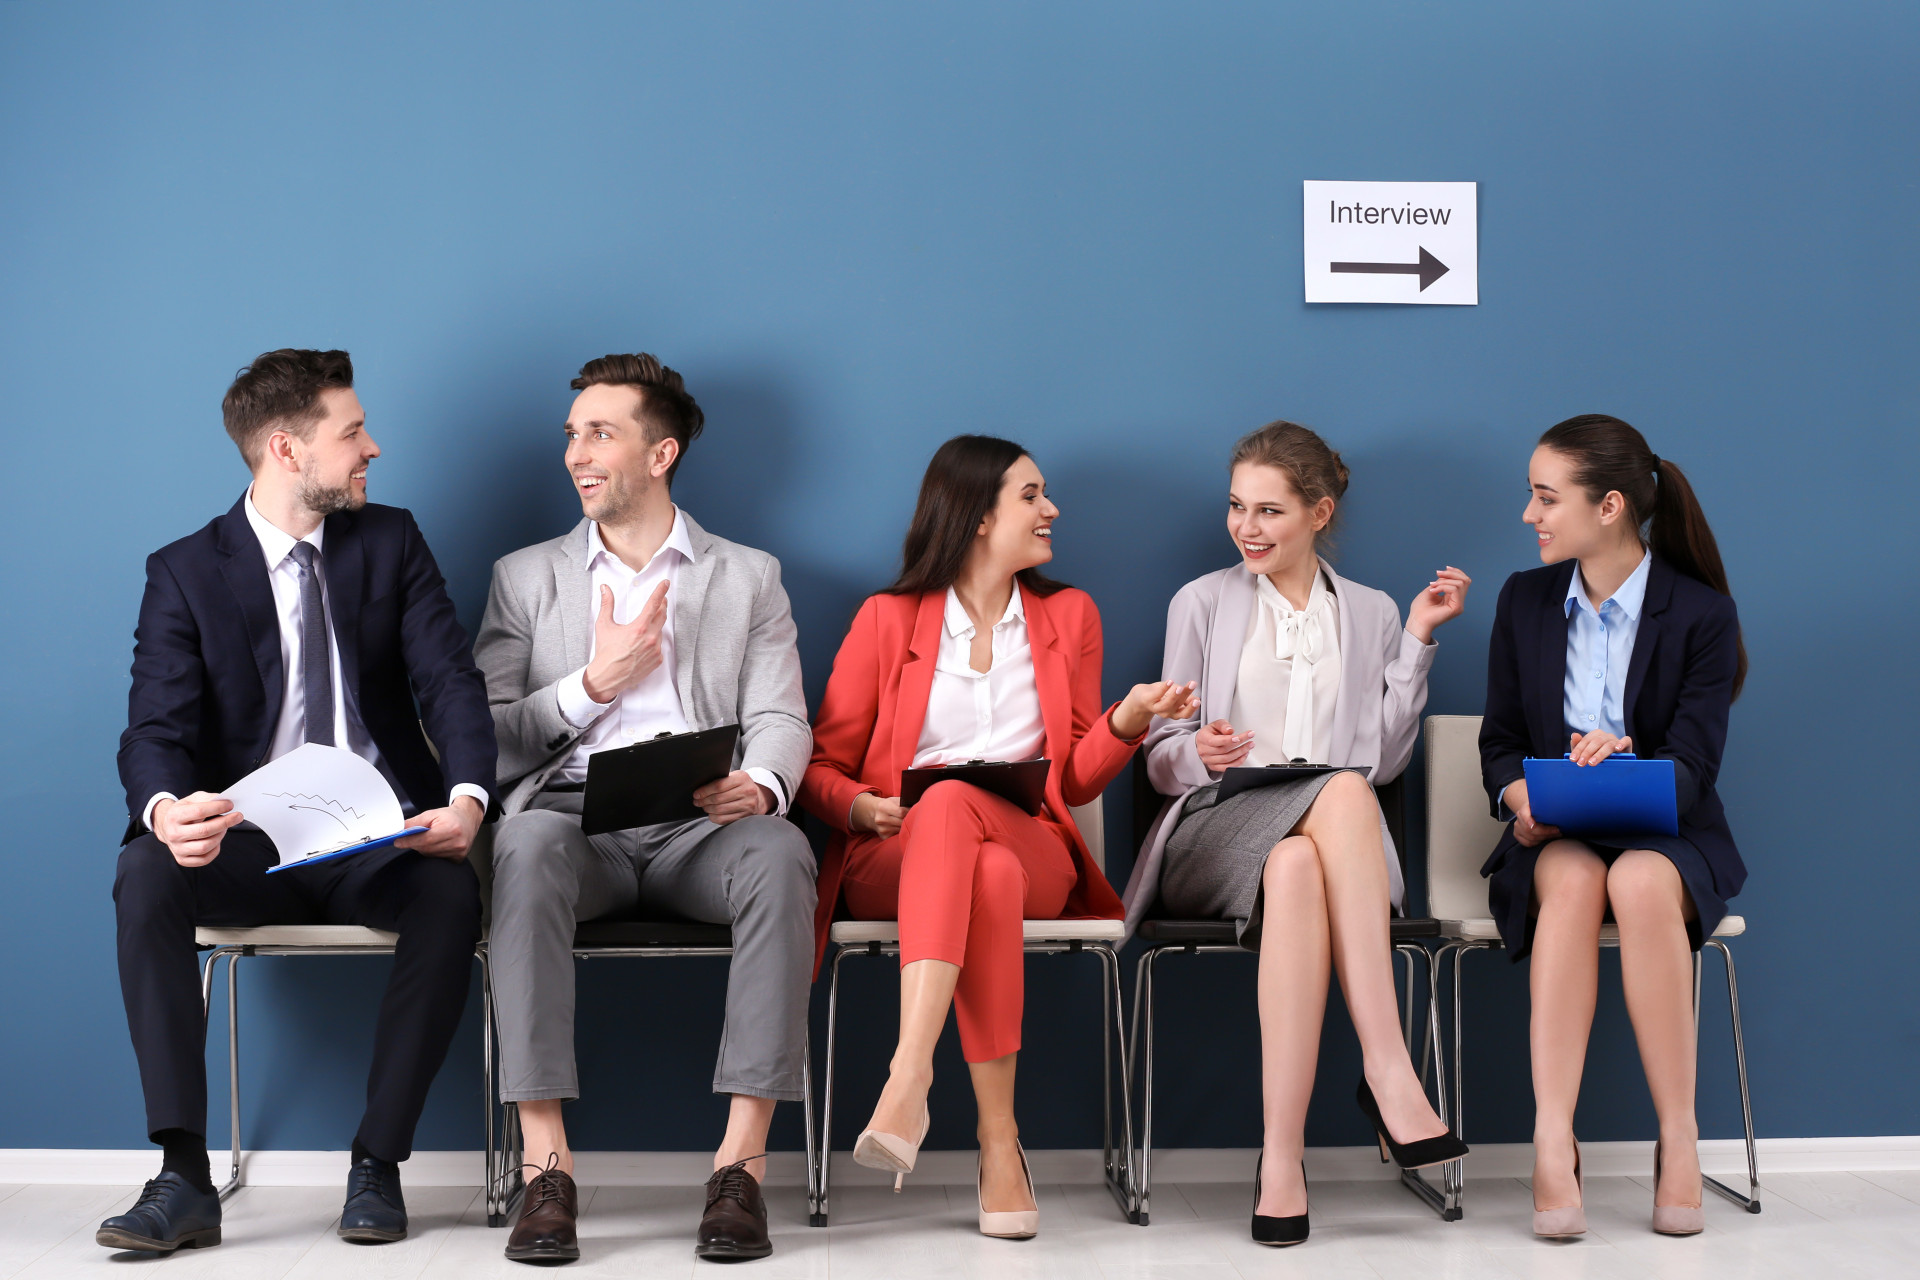 Job interviews usually call for formal wear. But make sure you adapt according to the company. If you know a firm is more informal, then wear more casual clothes so you fit in.